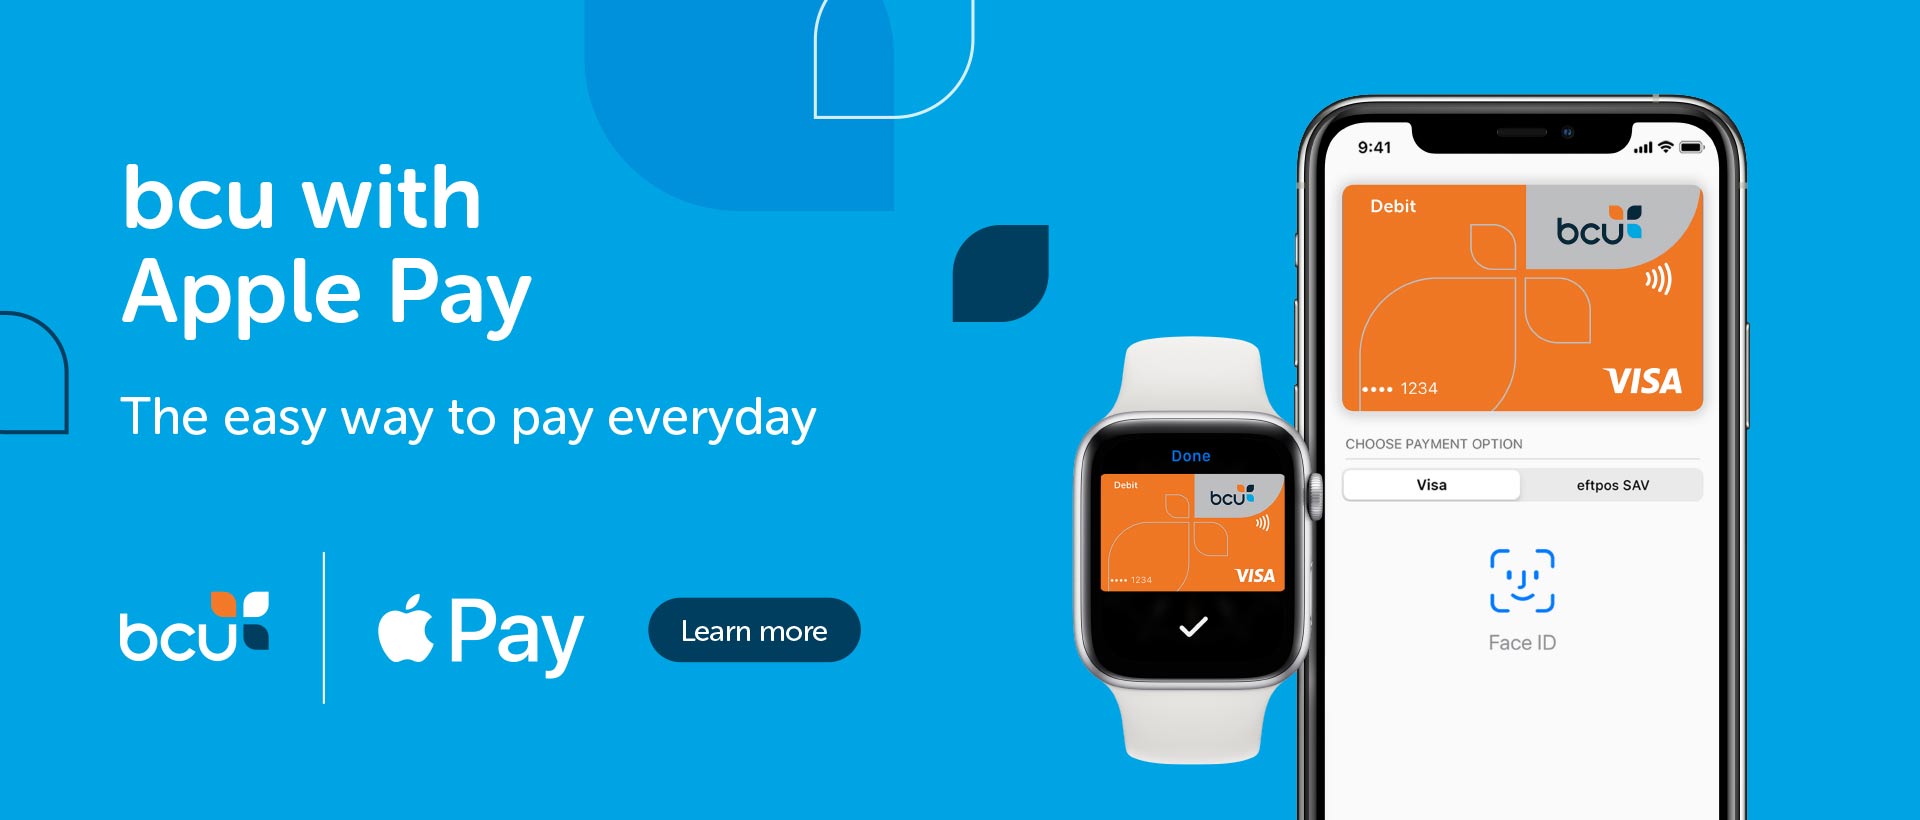 bcu with Apple Pay, the easy way to pay everyday